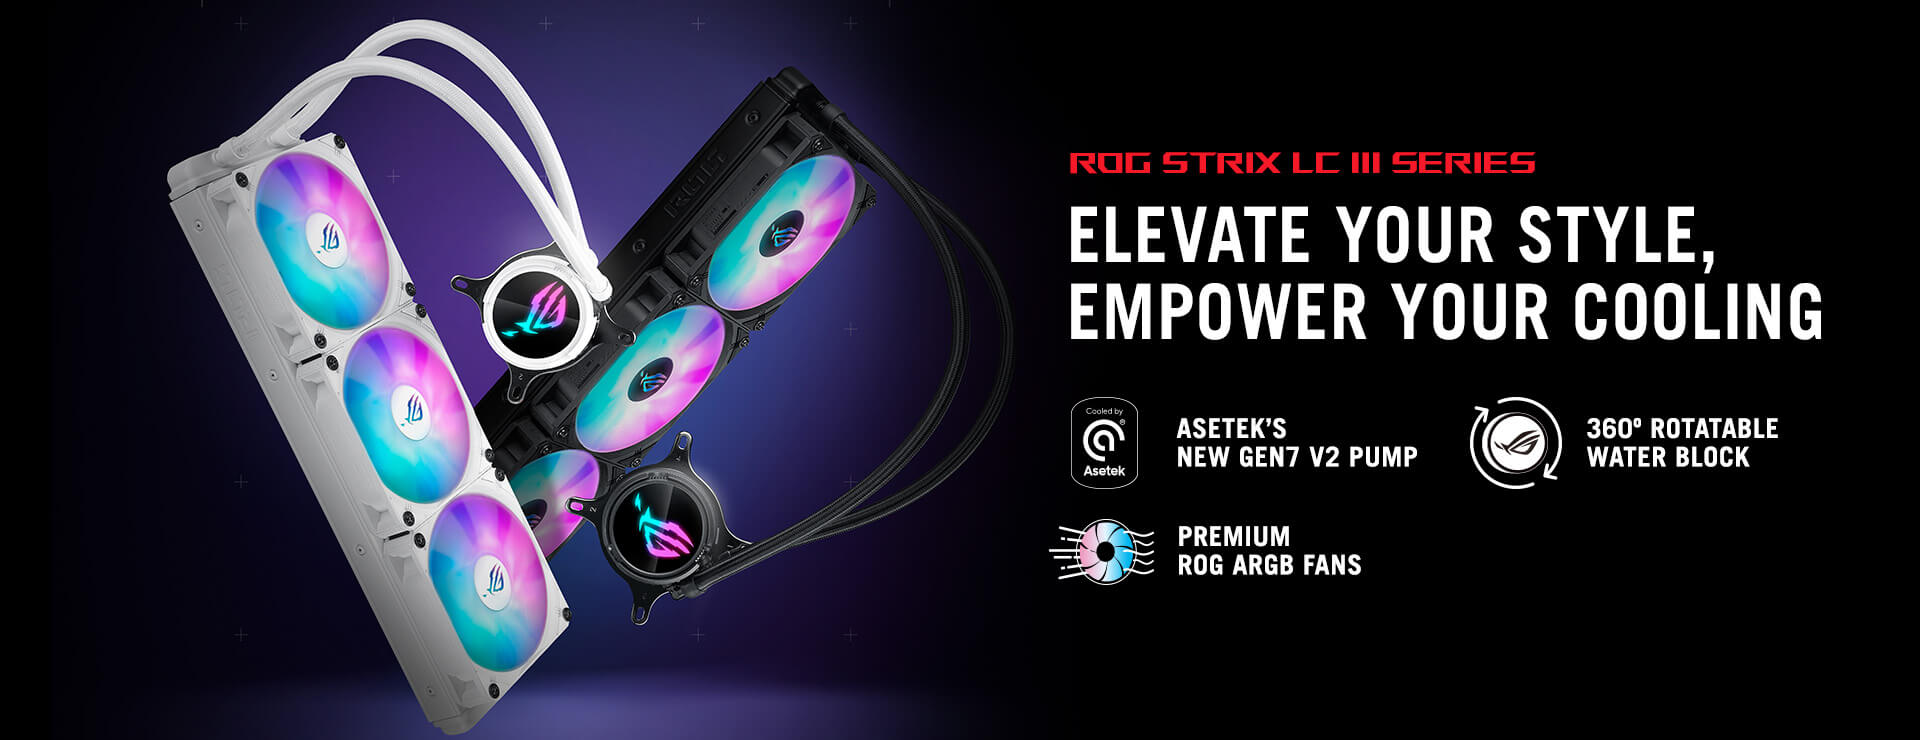 ROG Strix LC III Series. ELEVATE YOUR STYLE, EMPOWER YOUR COOLING. With Asetek's New Gen7 V2 Pump, 360° Rotatable water block, and Premium ROG ARGB Fans.